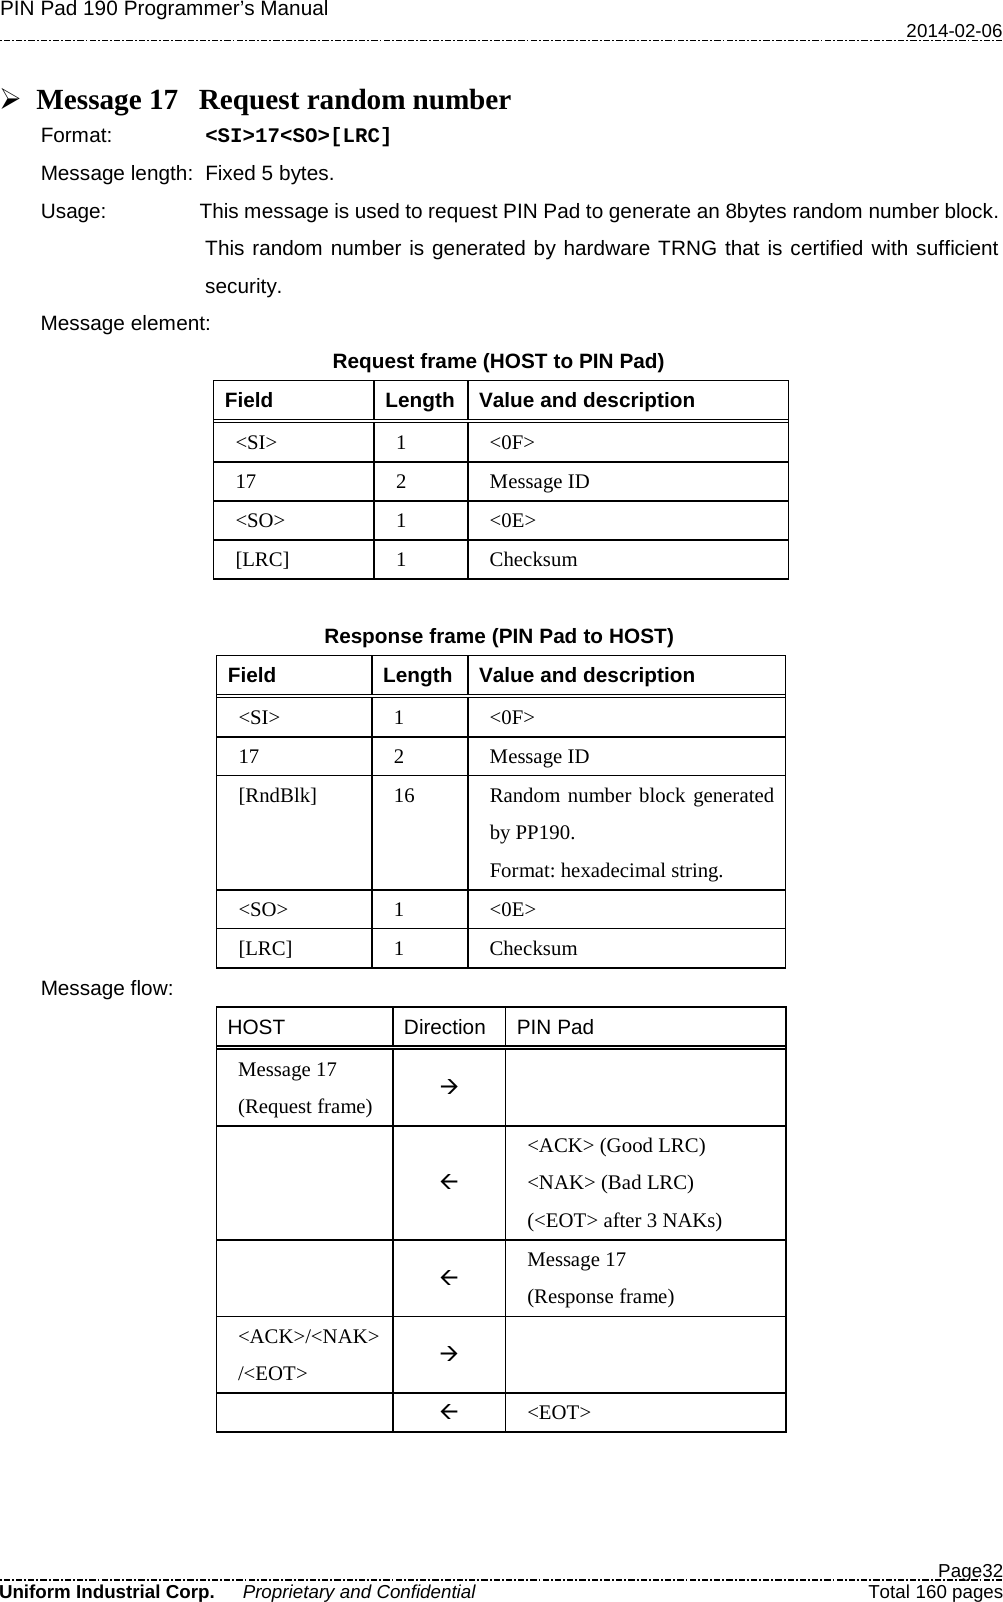 PIN Pad 190 Programmer’s Manual   2014-02-06  Page32 Uniform Industrial Corp. Proprietary and Confidential  Total 160 pages   Message 17  Request random number Format:   &lt;SI&gt;17&lt;SO&gt;[LRC] Message length: Fixed 5 bytes. Usage: This message is used to request PIN Pad to generate an 8bytes random number block. This random number is generated by hardware TRNG that is certified with sufficient security. Message element: Request frame (HOST to PIN Pad) Field  Length  Value and description &lt;SI&gt;  1  &lt;0F&gt; 17  2  Message ID &lt;SO&gt;  1  &lt;0E&gt; [LRC]  1  Checksum  Response frame (PIN Pad to HOST) Field  Length  Value and description &lt;SI&gt;  1  &lt;0F&gt; 17  2  Message ID [RndBlk]  16 Random number block generated by PP190.   Format: hexadecimal string. &lt;SO&gt;  1  &lt;0E&gt; [LRC]  1  Checksum Message flow: HOST Direction PIN Pad Message 17 (Request frame)     &lt;ACK&gt; (Good LRC) &lt;NAK&gt; (Bad LRC) (&lt;EOT&gt; after 3 NAKs)   Message 17 (Response frame) &lt;ACK&gt;/&lt;NAK&gt;/&lt;EOT&gt;     &lt;EOT&gt;   